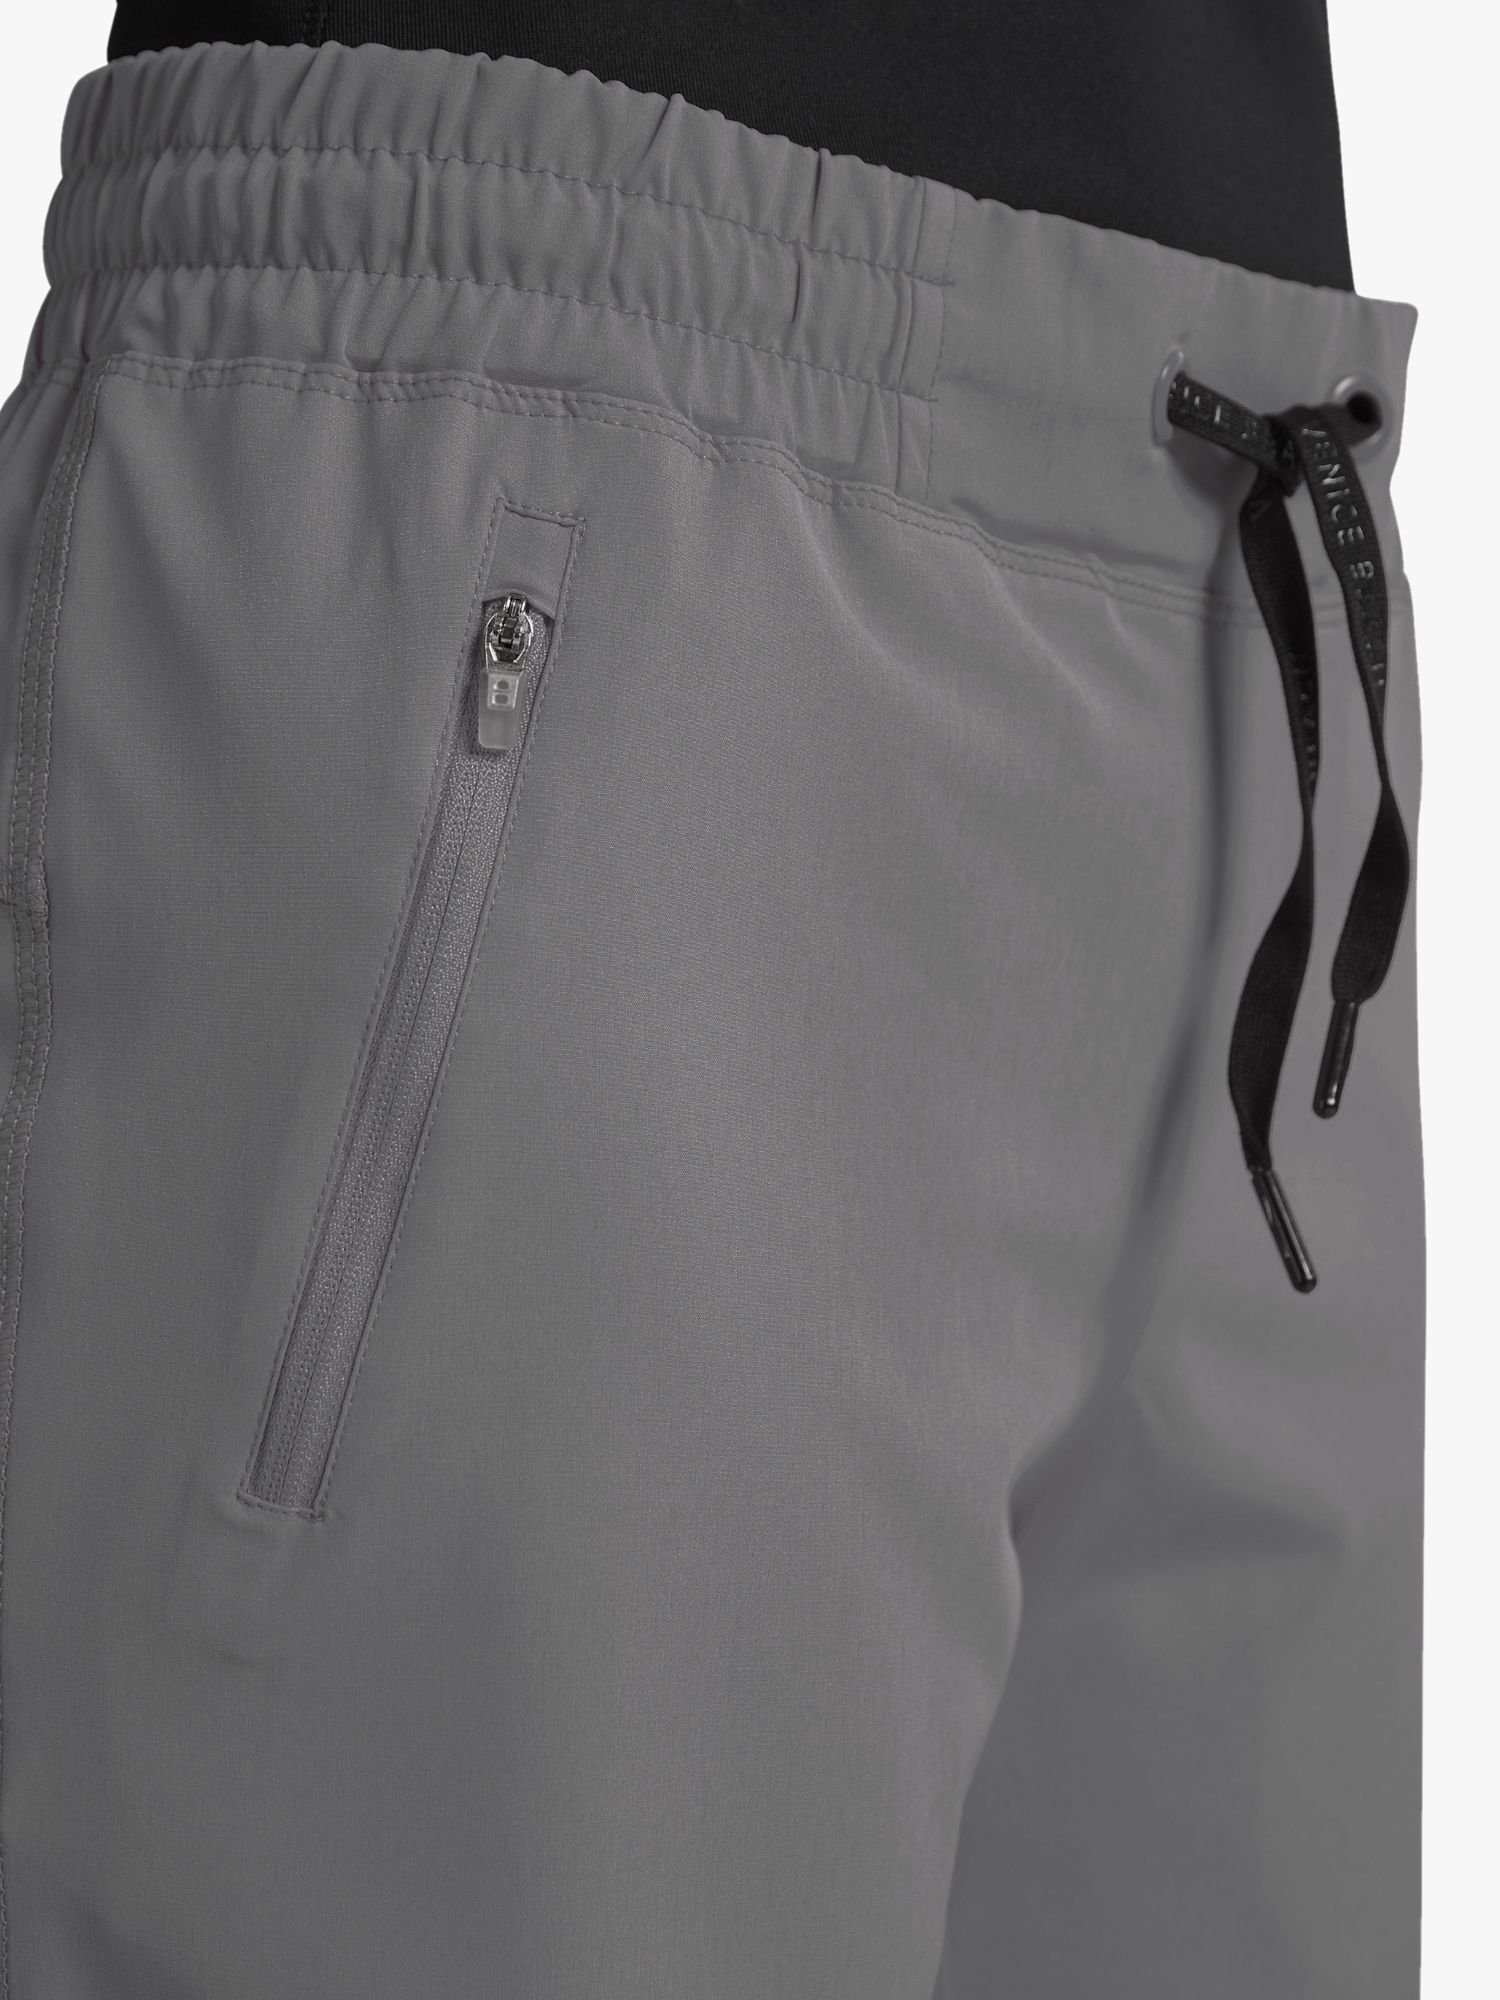 Venice Beach Shelby Shorts, Graphite at John Lewis & Partners